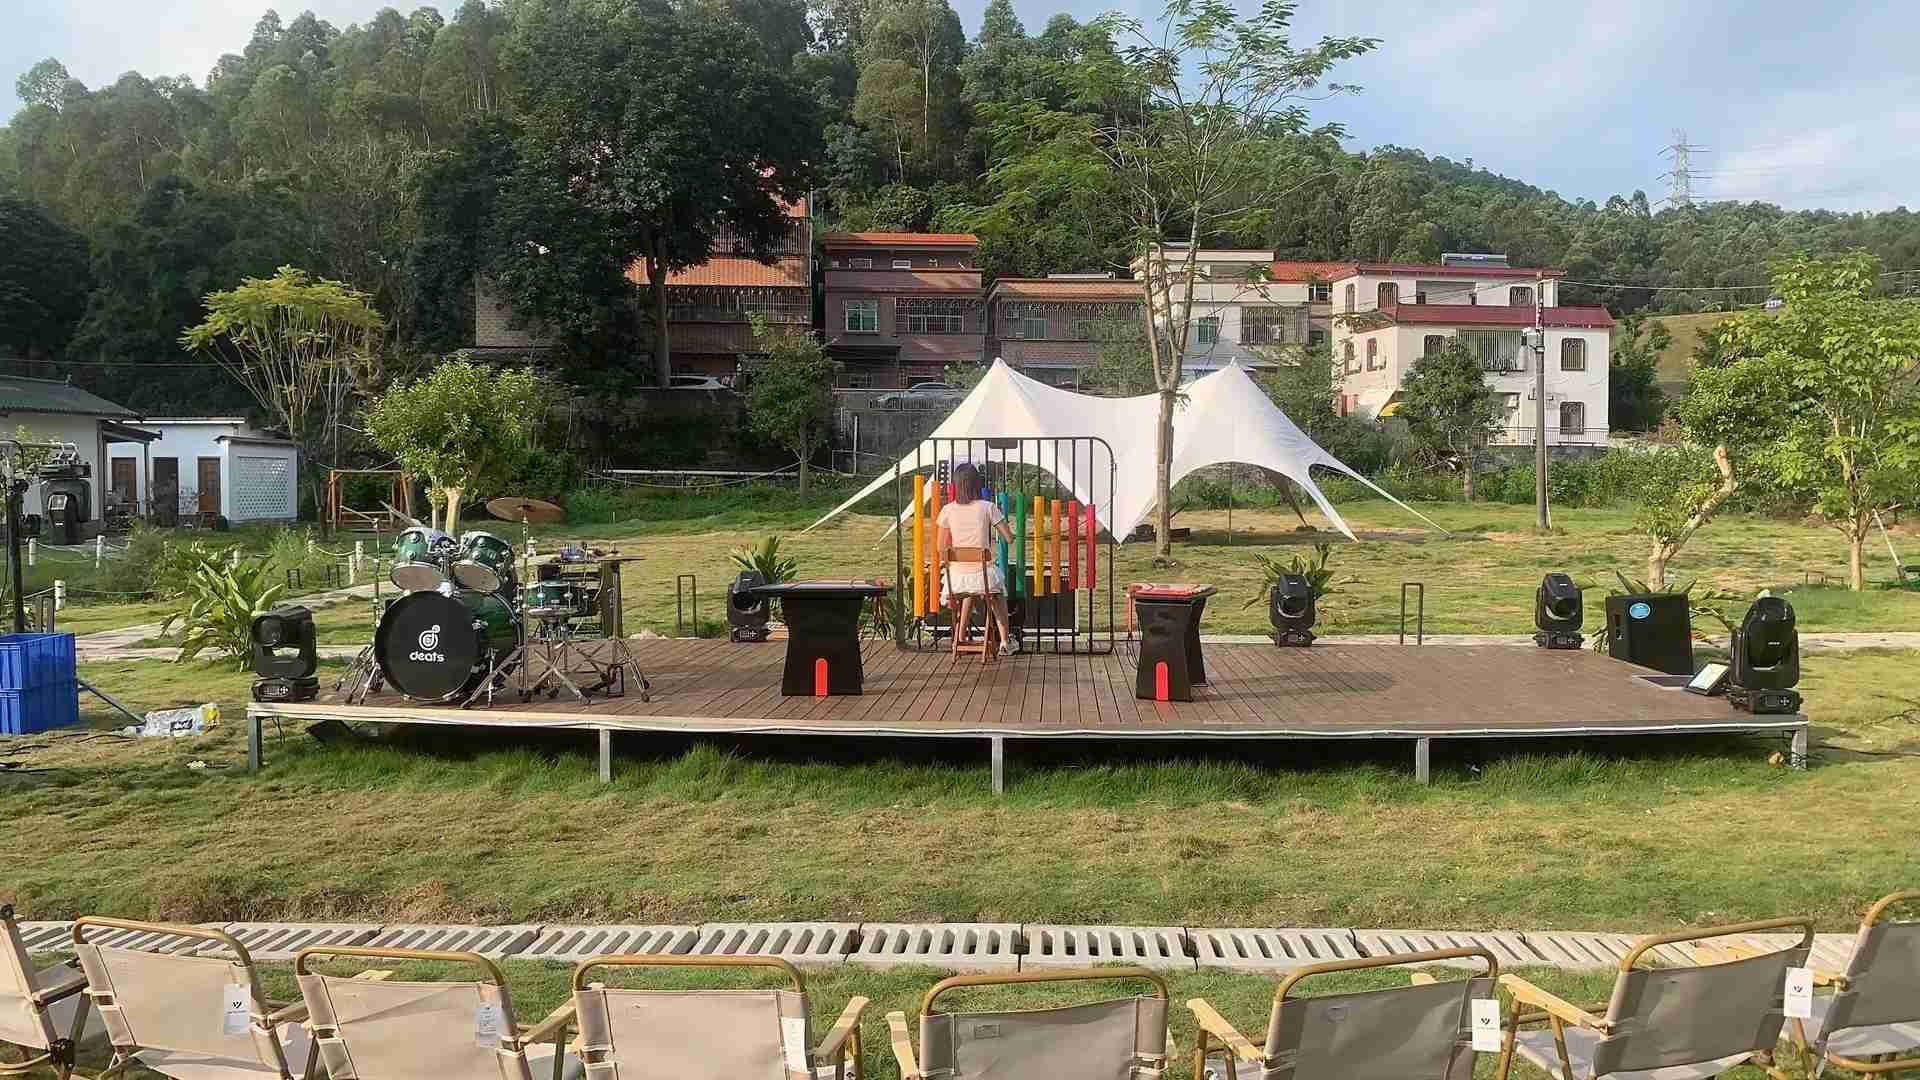 Countryside Music and Culture Festival - Enjoying Music in Nature